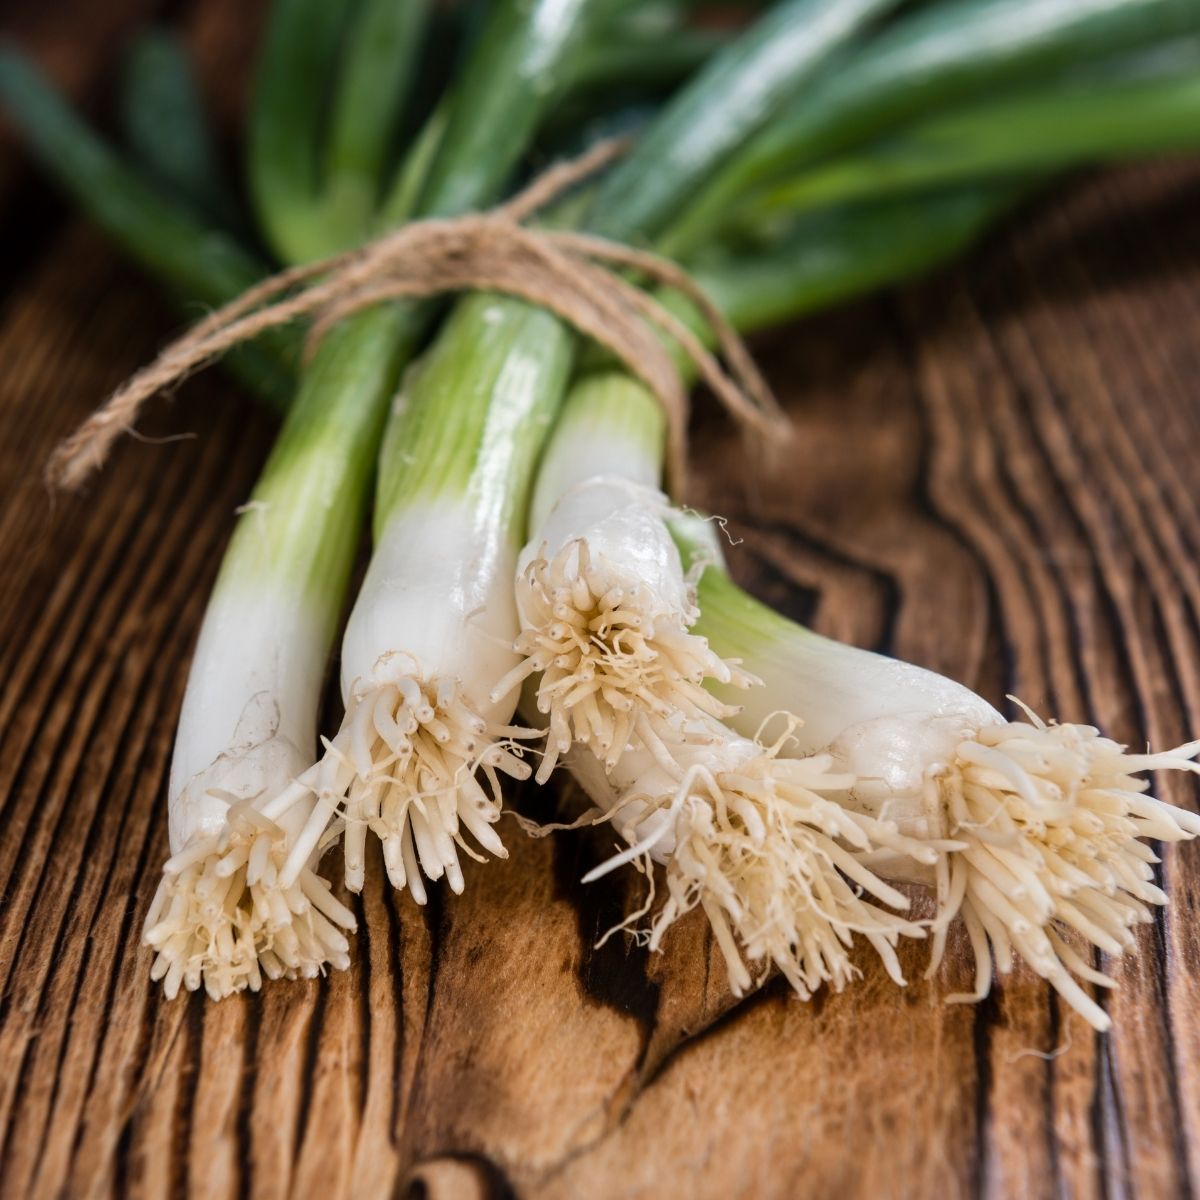 How to Grow Bunching Onions from Seed